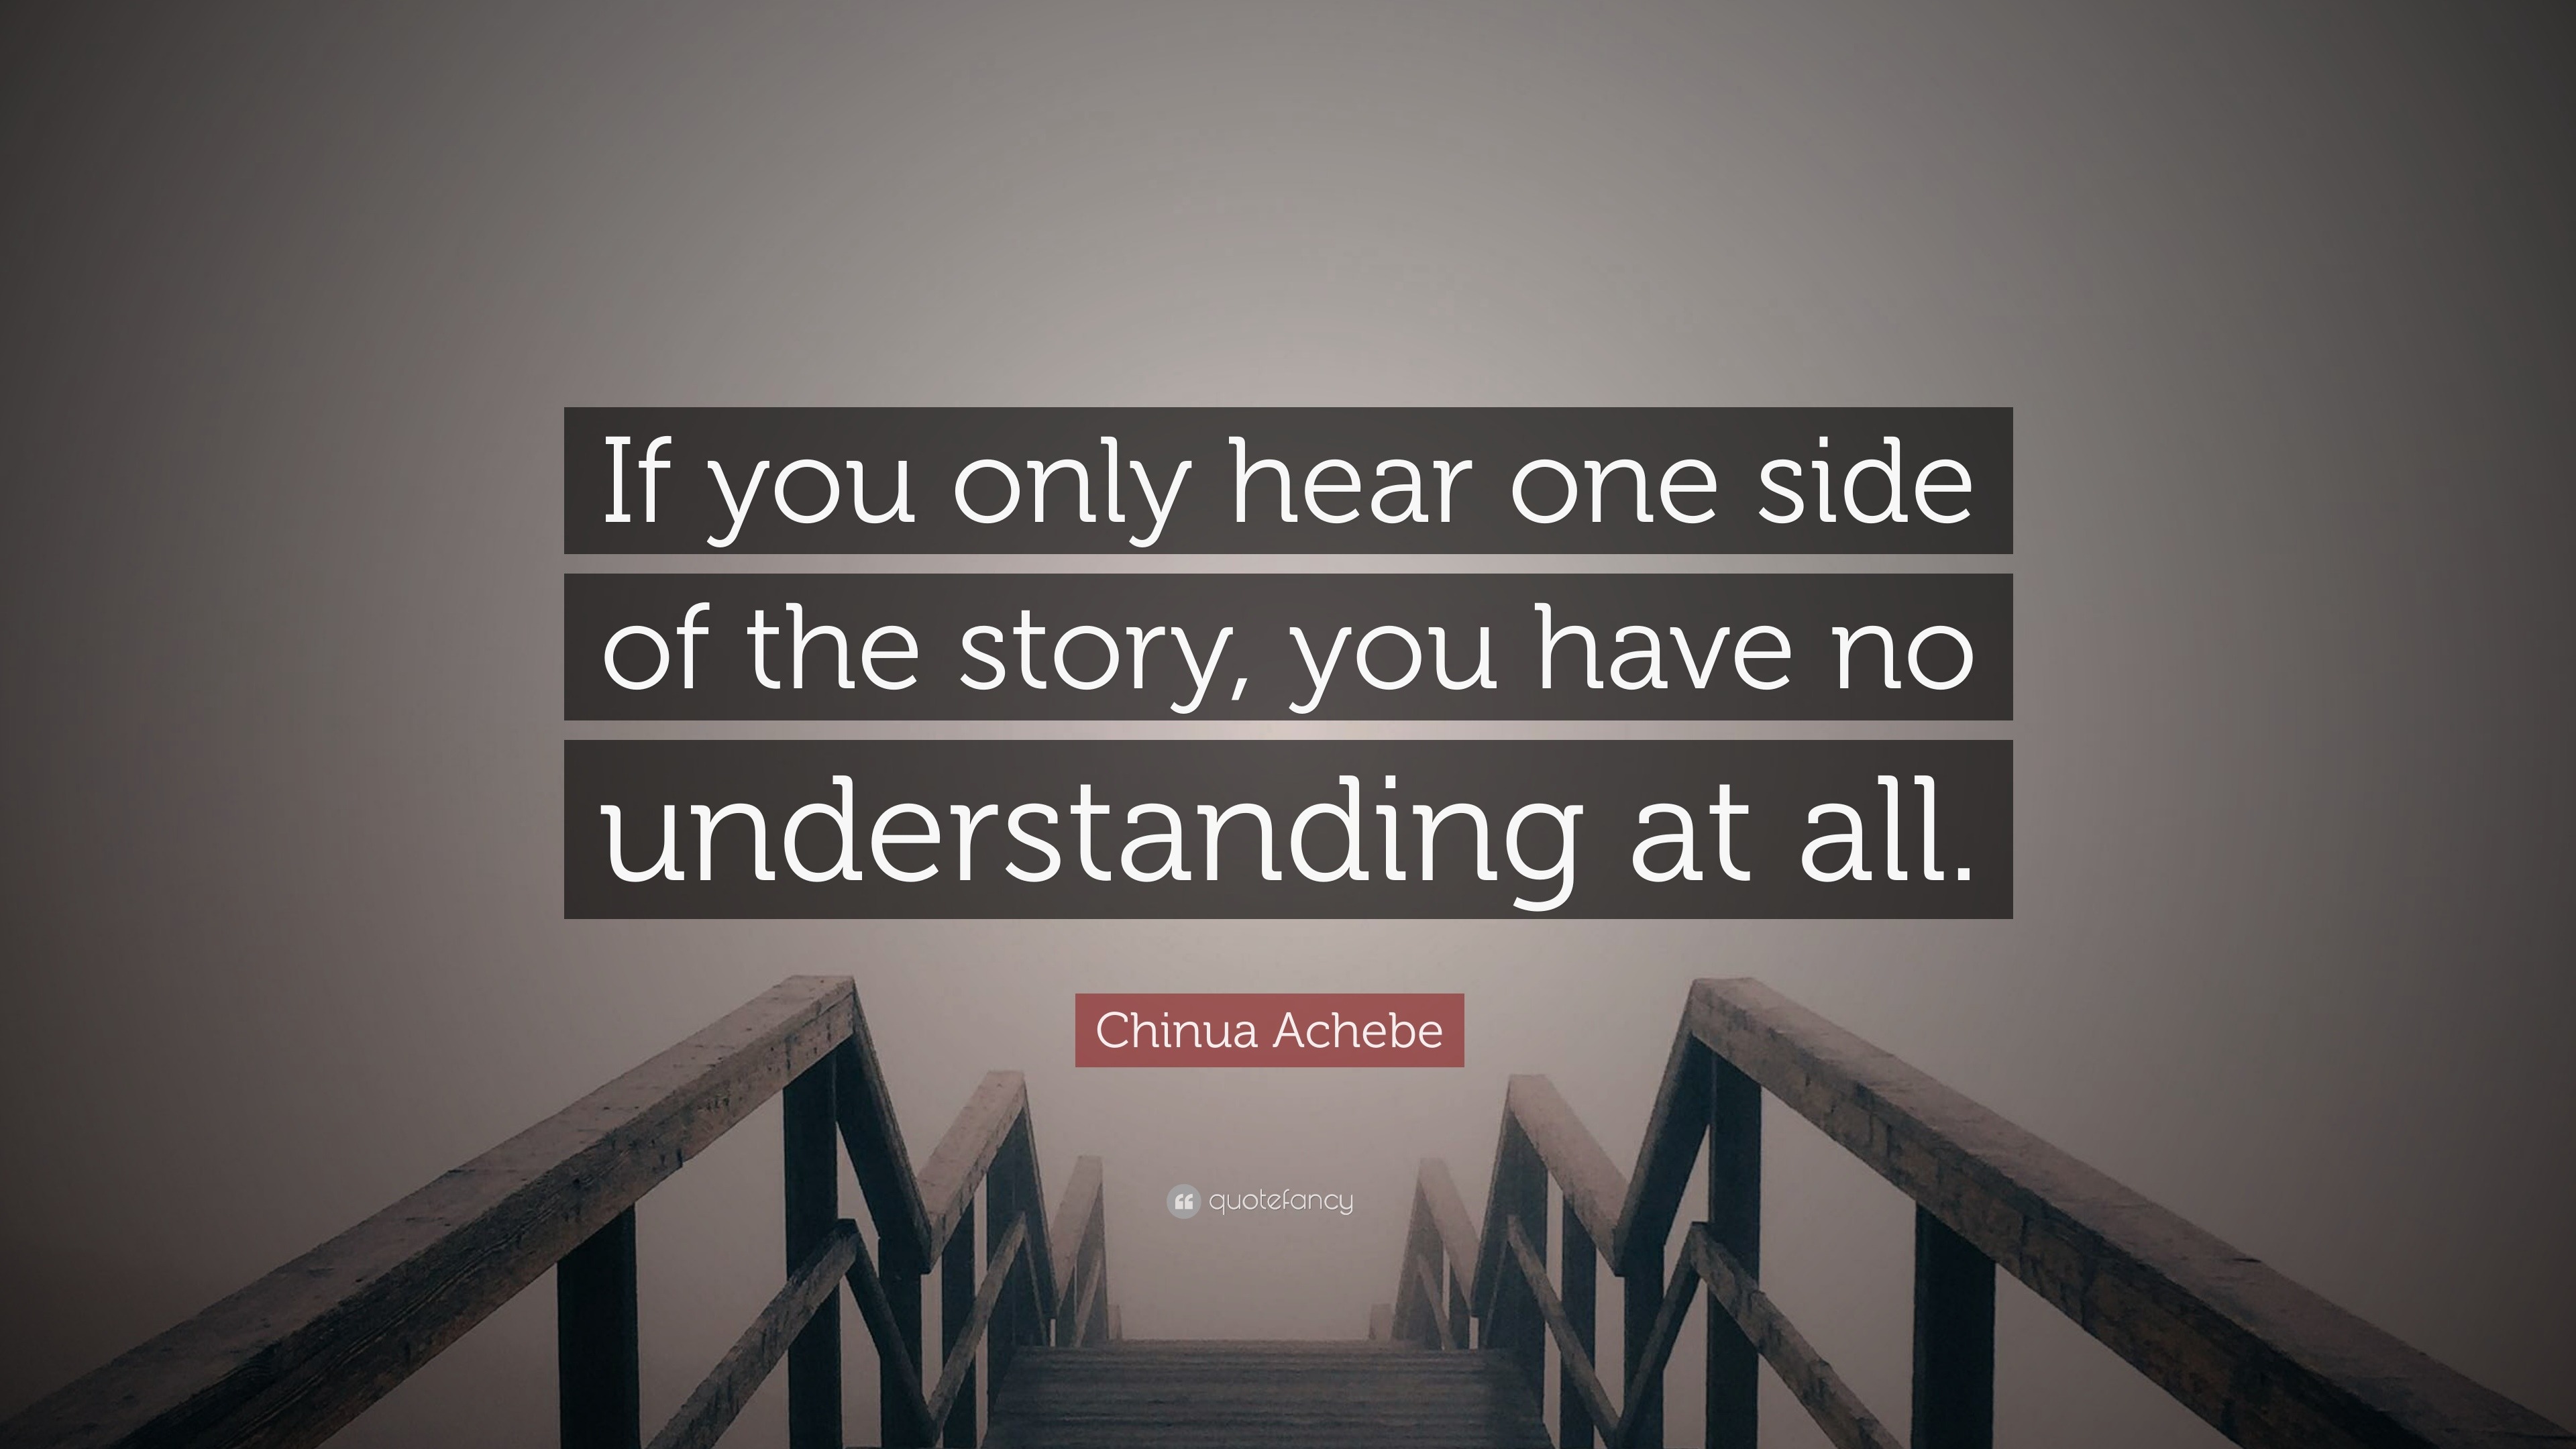 Chinua Achebe Quote: “If you only hear one side of the story, you